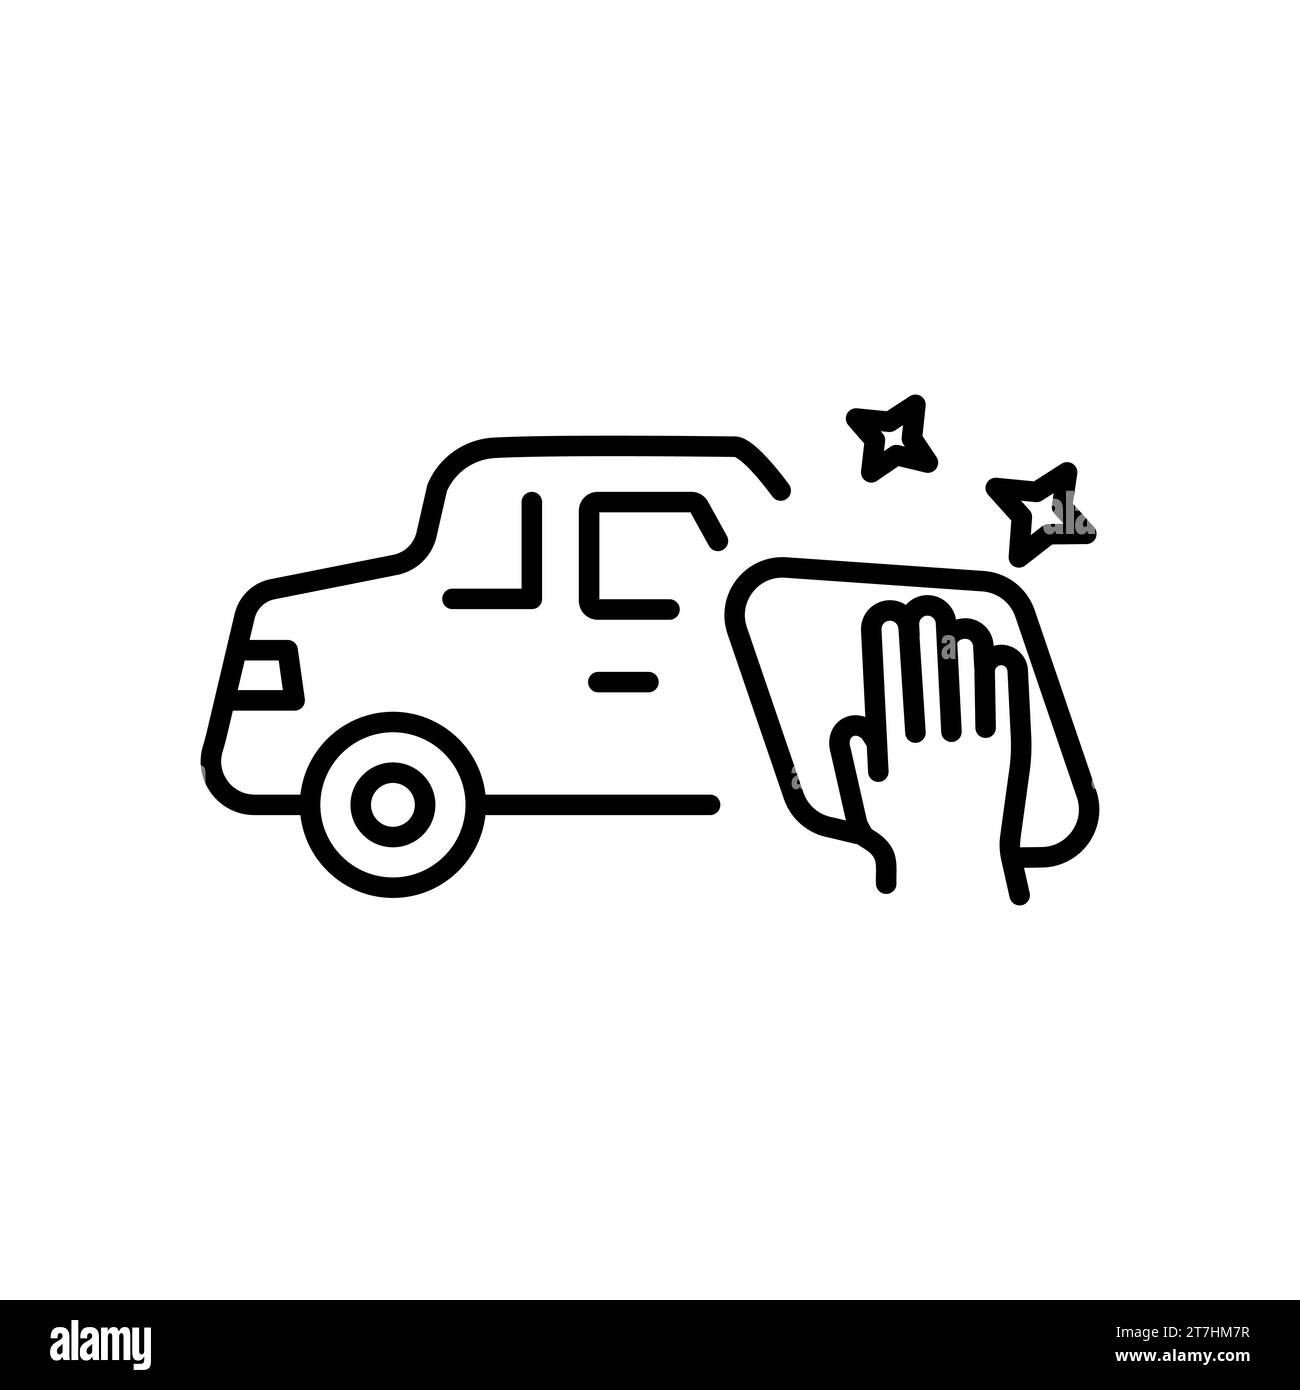 Car disinfection icon. Concept of public transport and taxi service covid safety measures. Editable stroke vector illustration Stock Vector